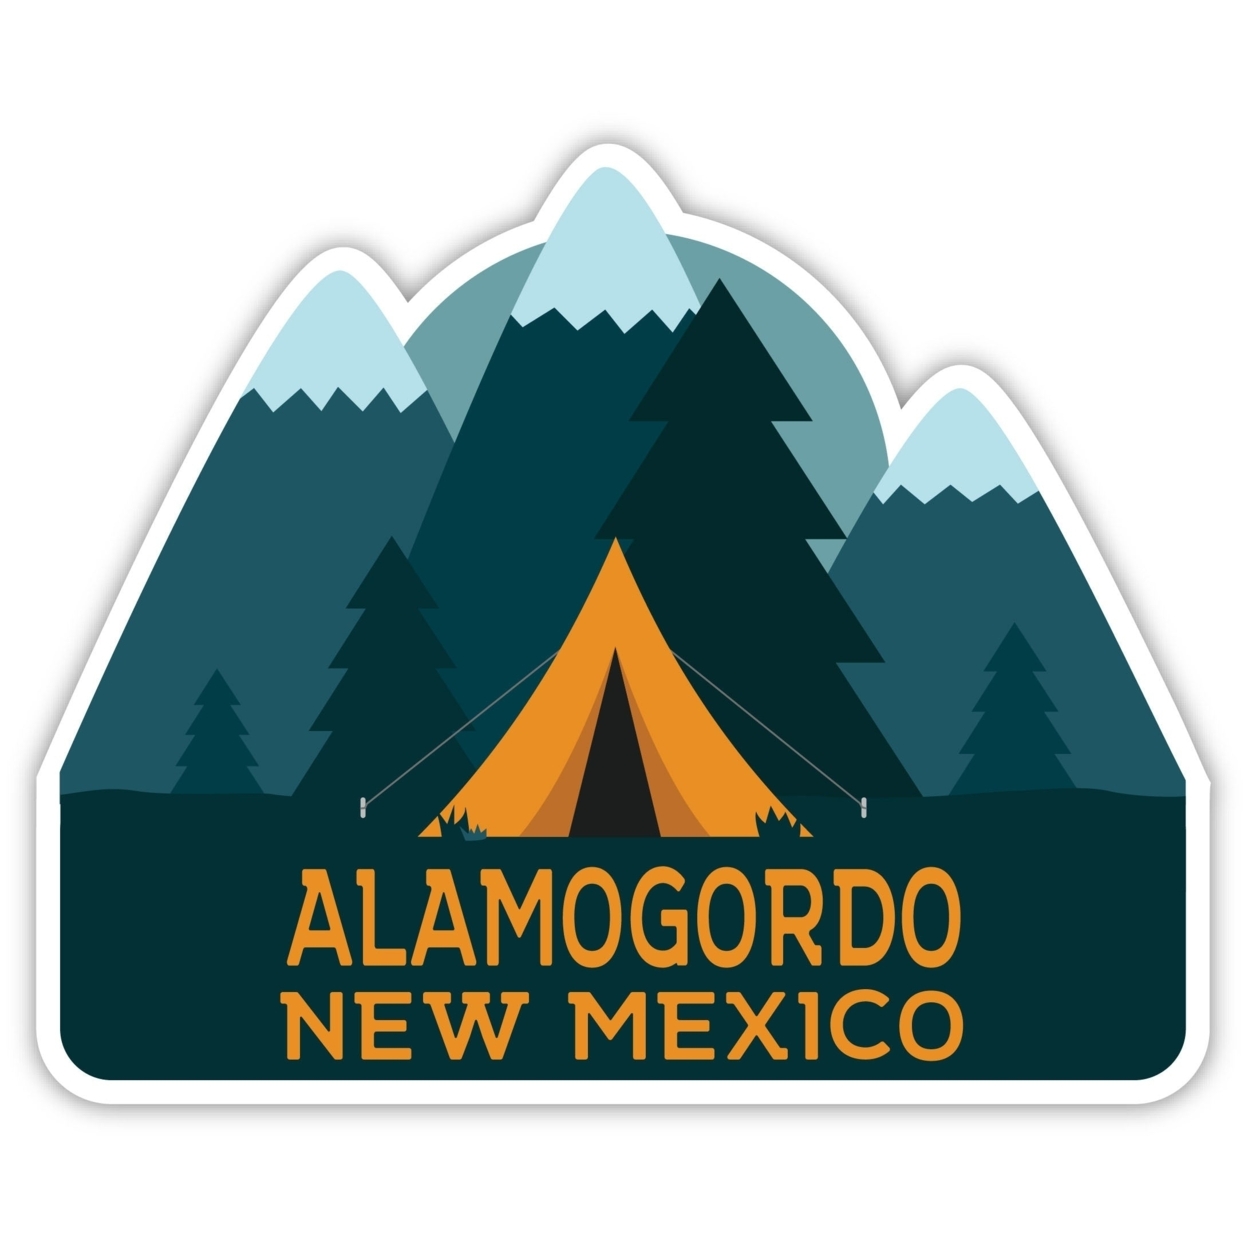 Alamogordo New Mexico Souvenir Decorative Stickers (Choose Theme And Size) - 4-Pack, 4-Inch, Tent